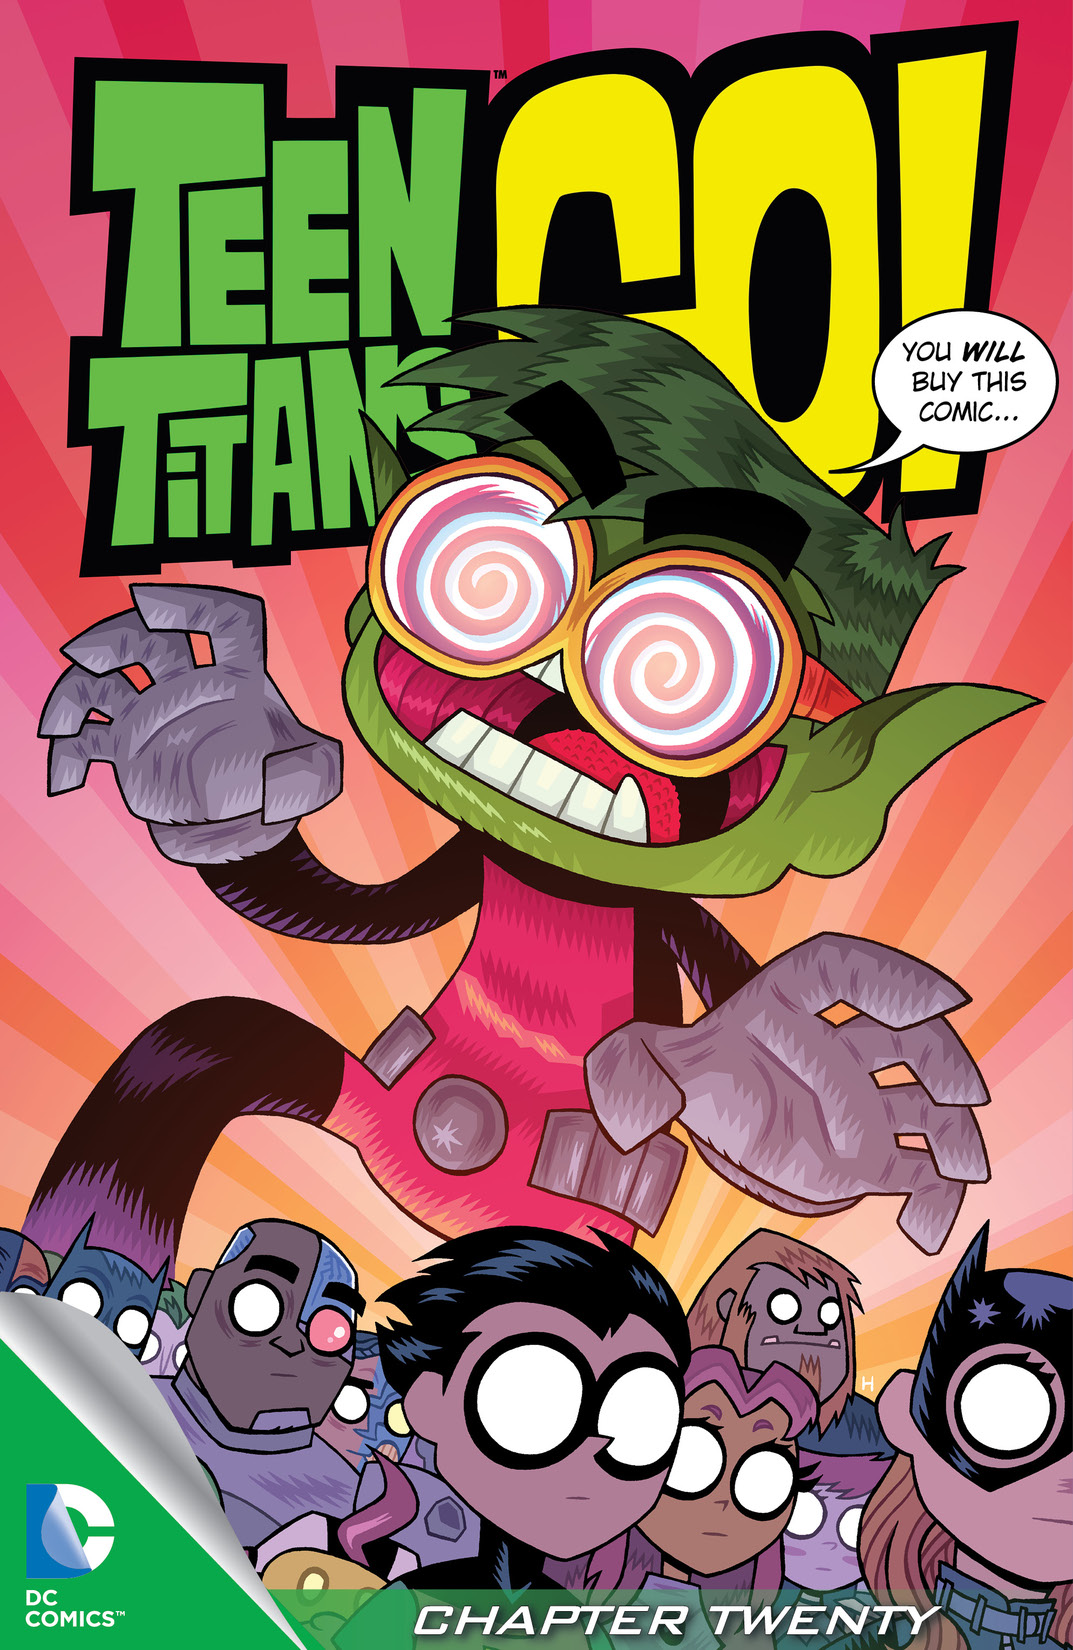 Teen Titans Go! (2013-) #20 preview images